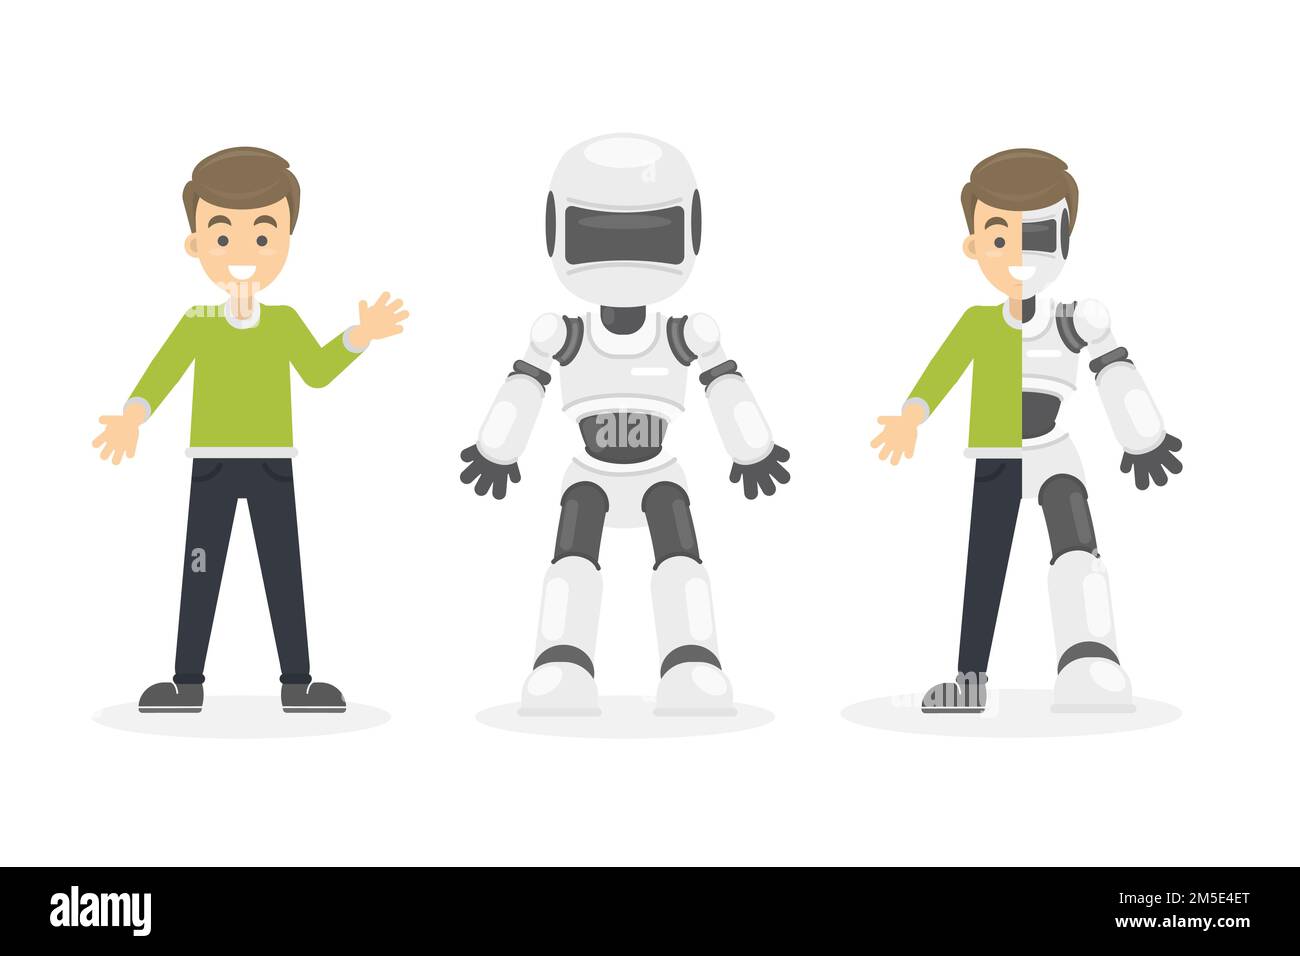 Half cyborg, half human. Isolated set of illustrations with happy smiling man and white robot. Stock Vector